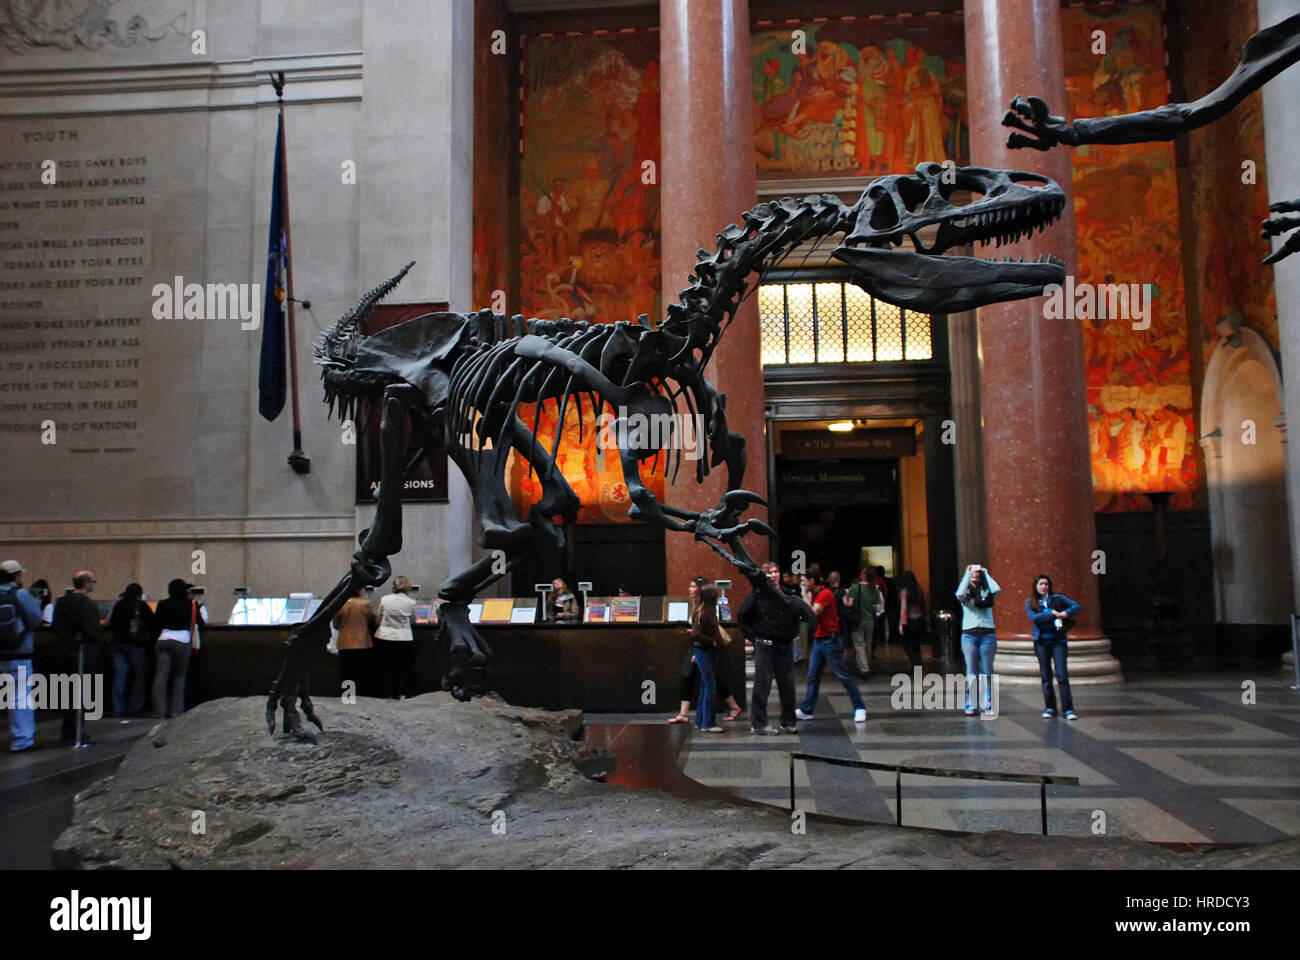 Dinosaur skeleton at NY museum, photographed in New York, United States. Stock Photo